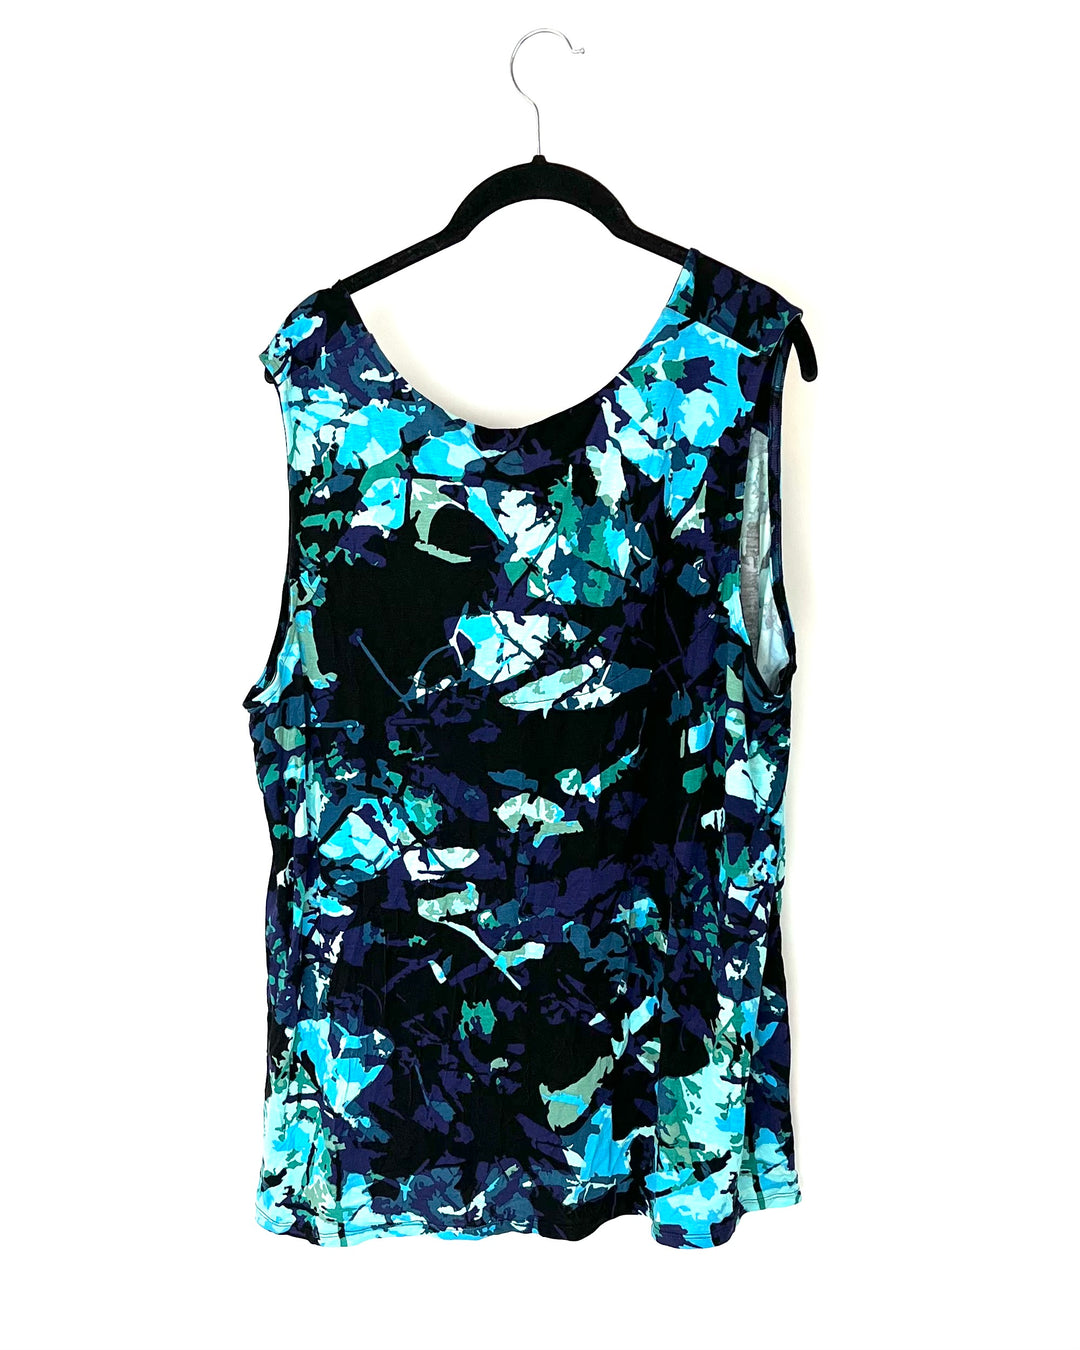 Blue Abstract Sleep Top - Size 18W